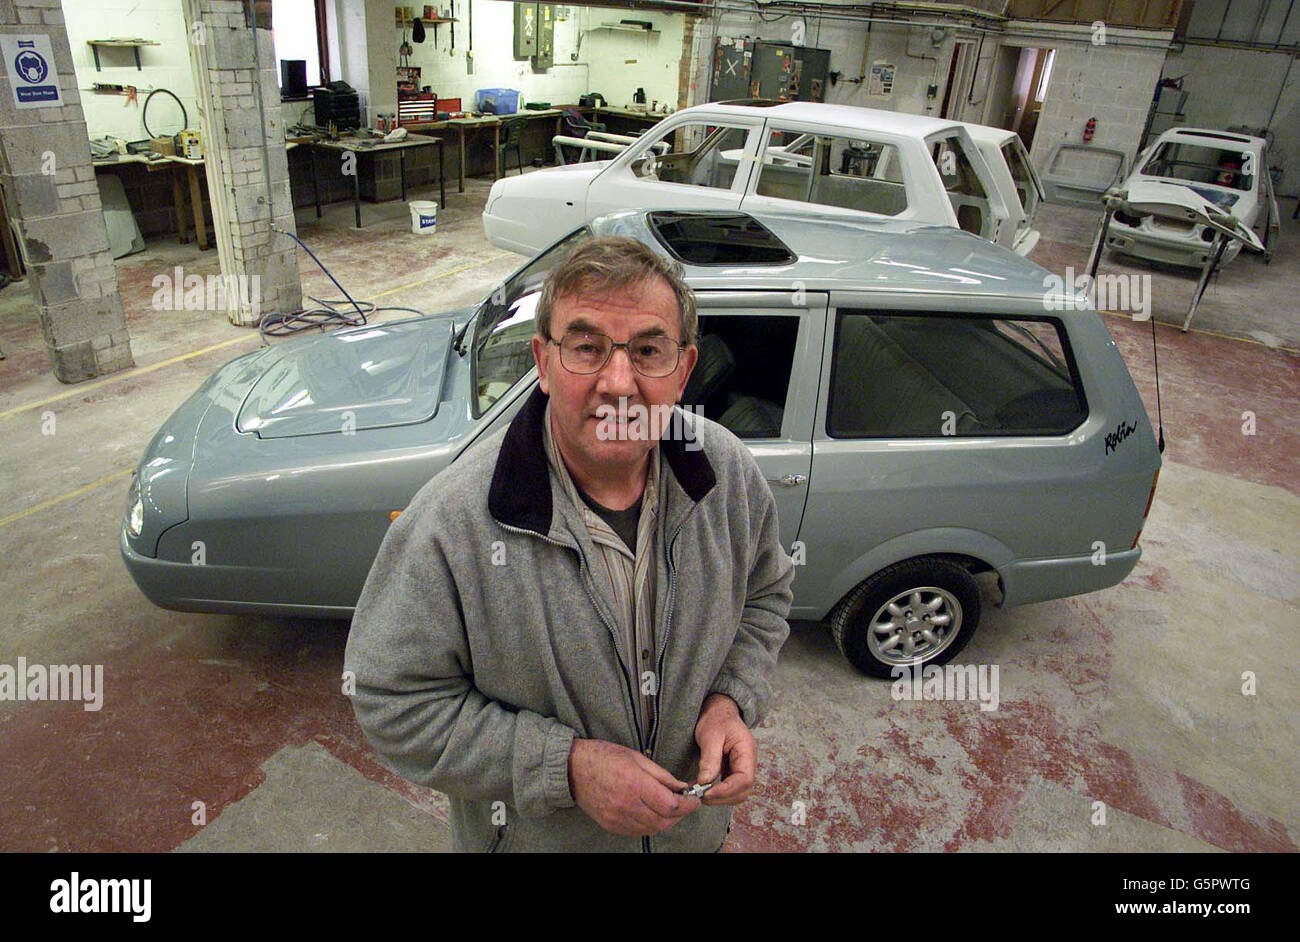 Les Collier, 59, owner of the B & N Plastics factory in Acton near Sudbury, Suffolk, stands with the new generation of Reliant Robin he is manufacturing after buying the production rights. * ...The first new models are now emerging from Mr Collier's plant, and he claims they are being snapped up before they reach garage forecourts. Stock Photo